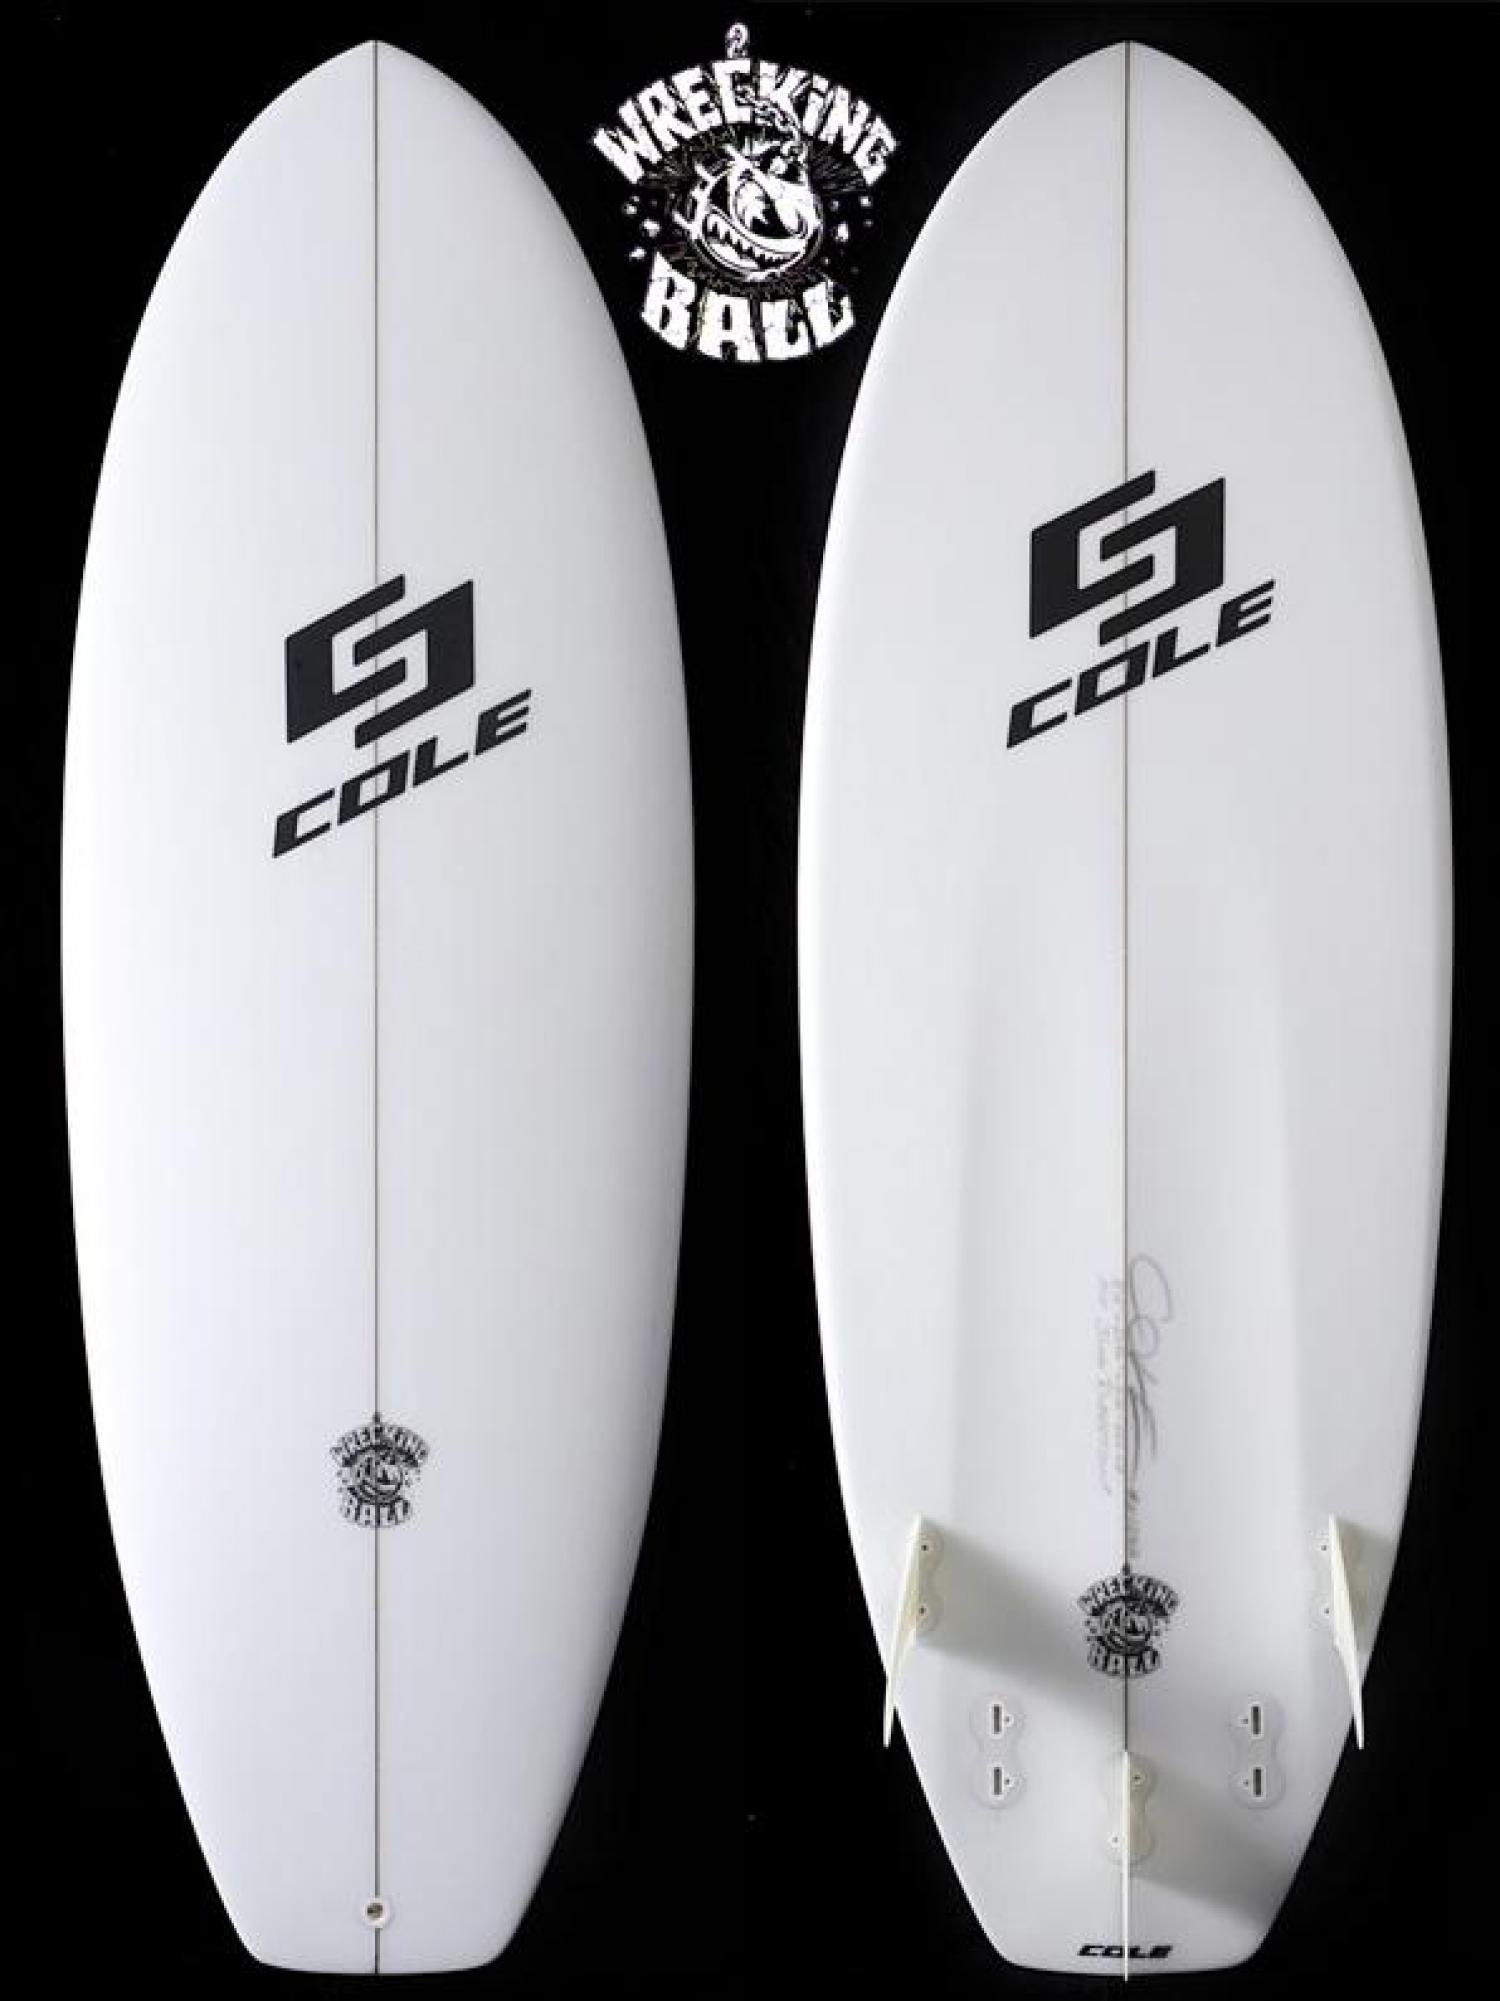 Wrecking Ball COLE SURFBOARDS  Order accepted